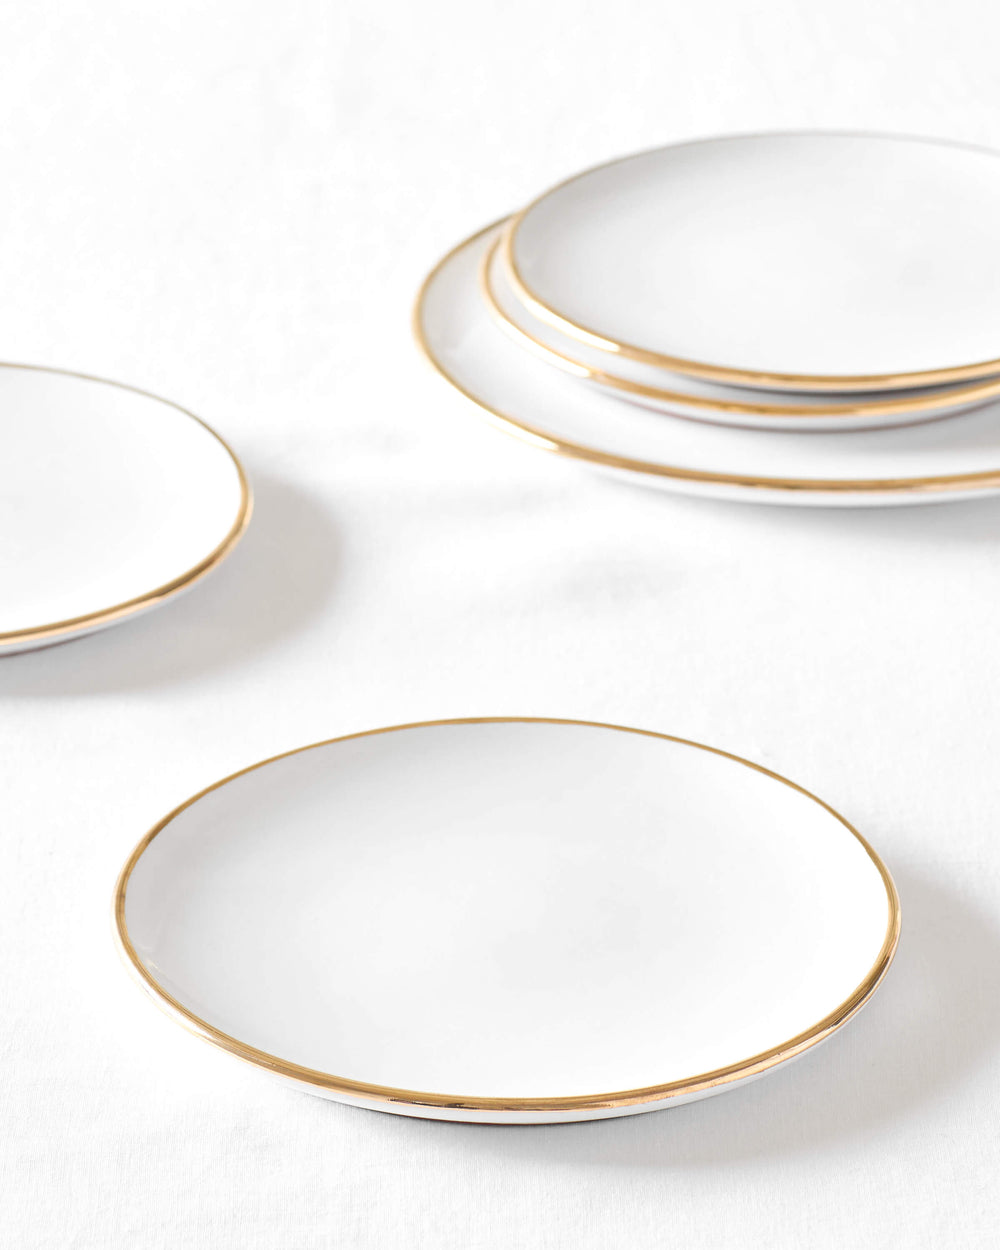 White ceramic salad plate with 18k gold edge on white background. Fez Dinnerware by Fairkind.